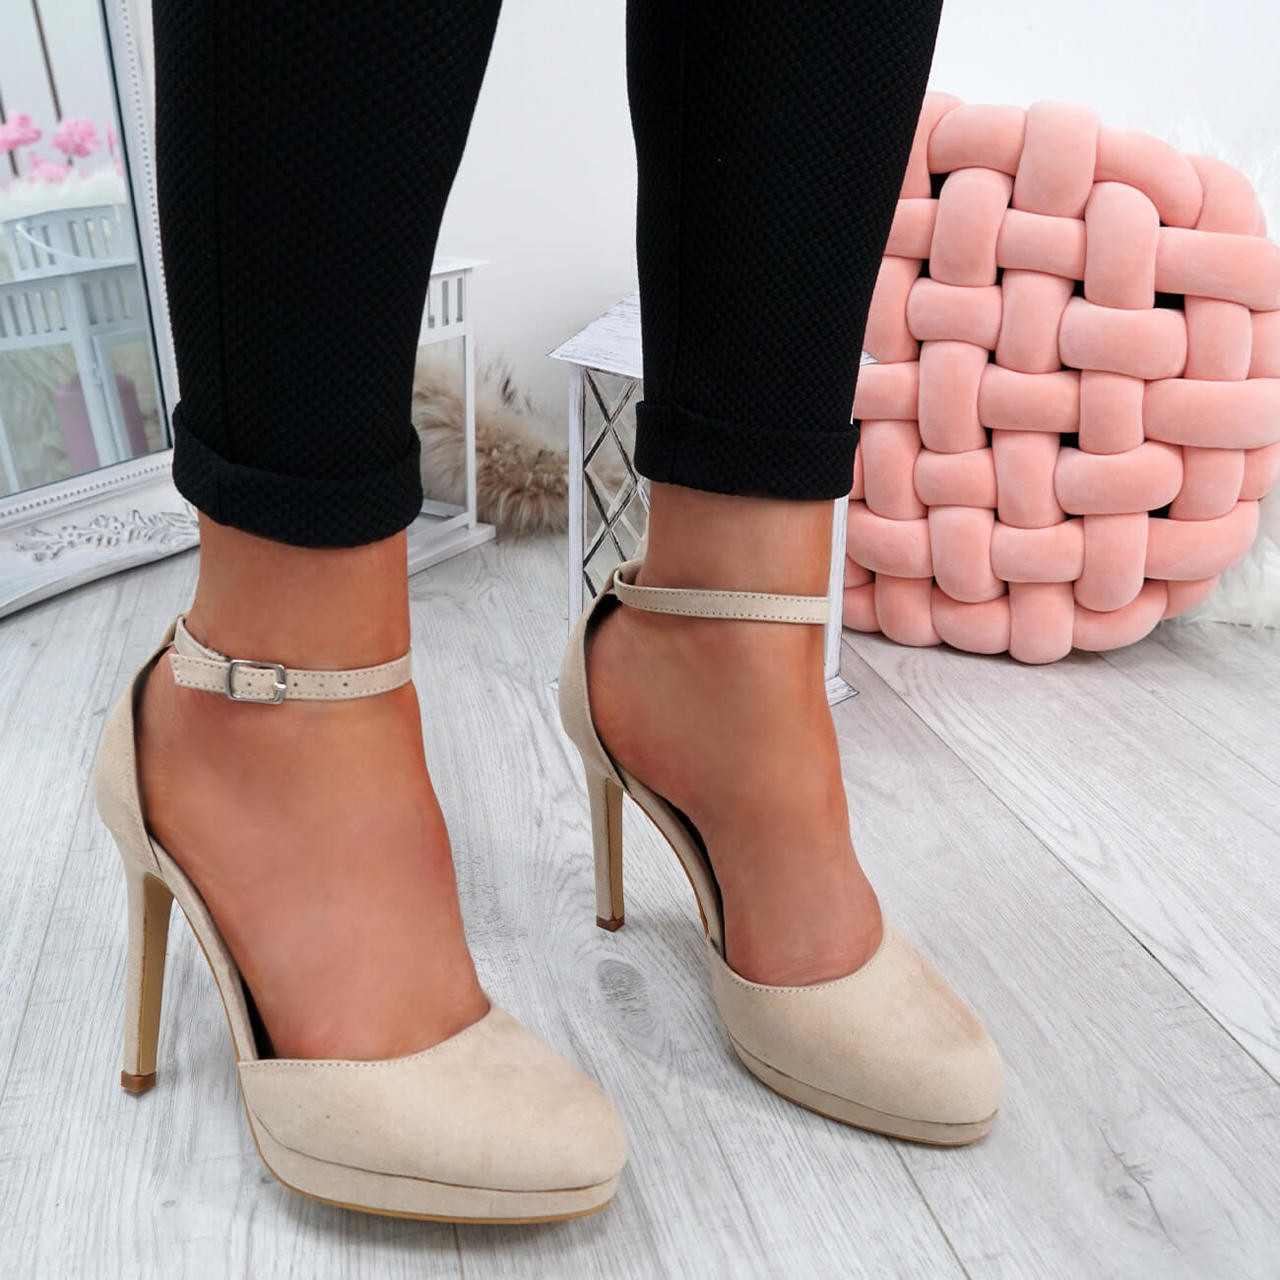 closed toe pumps with strap